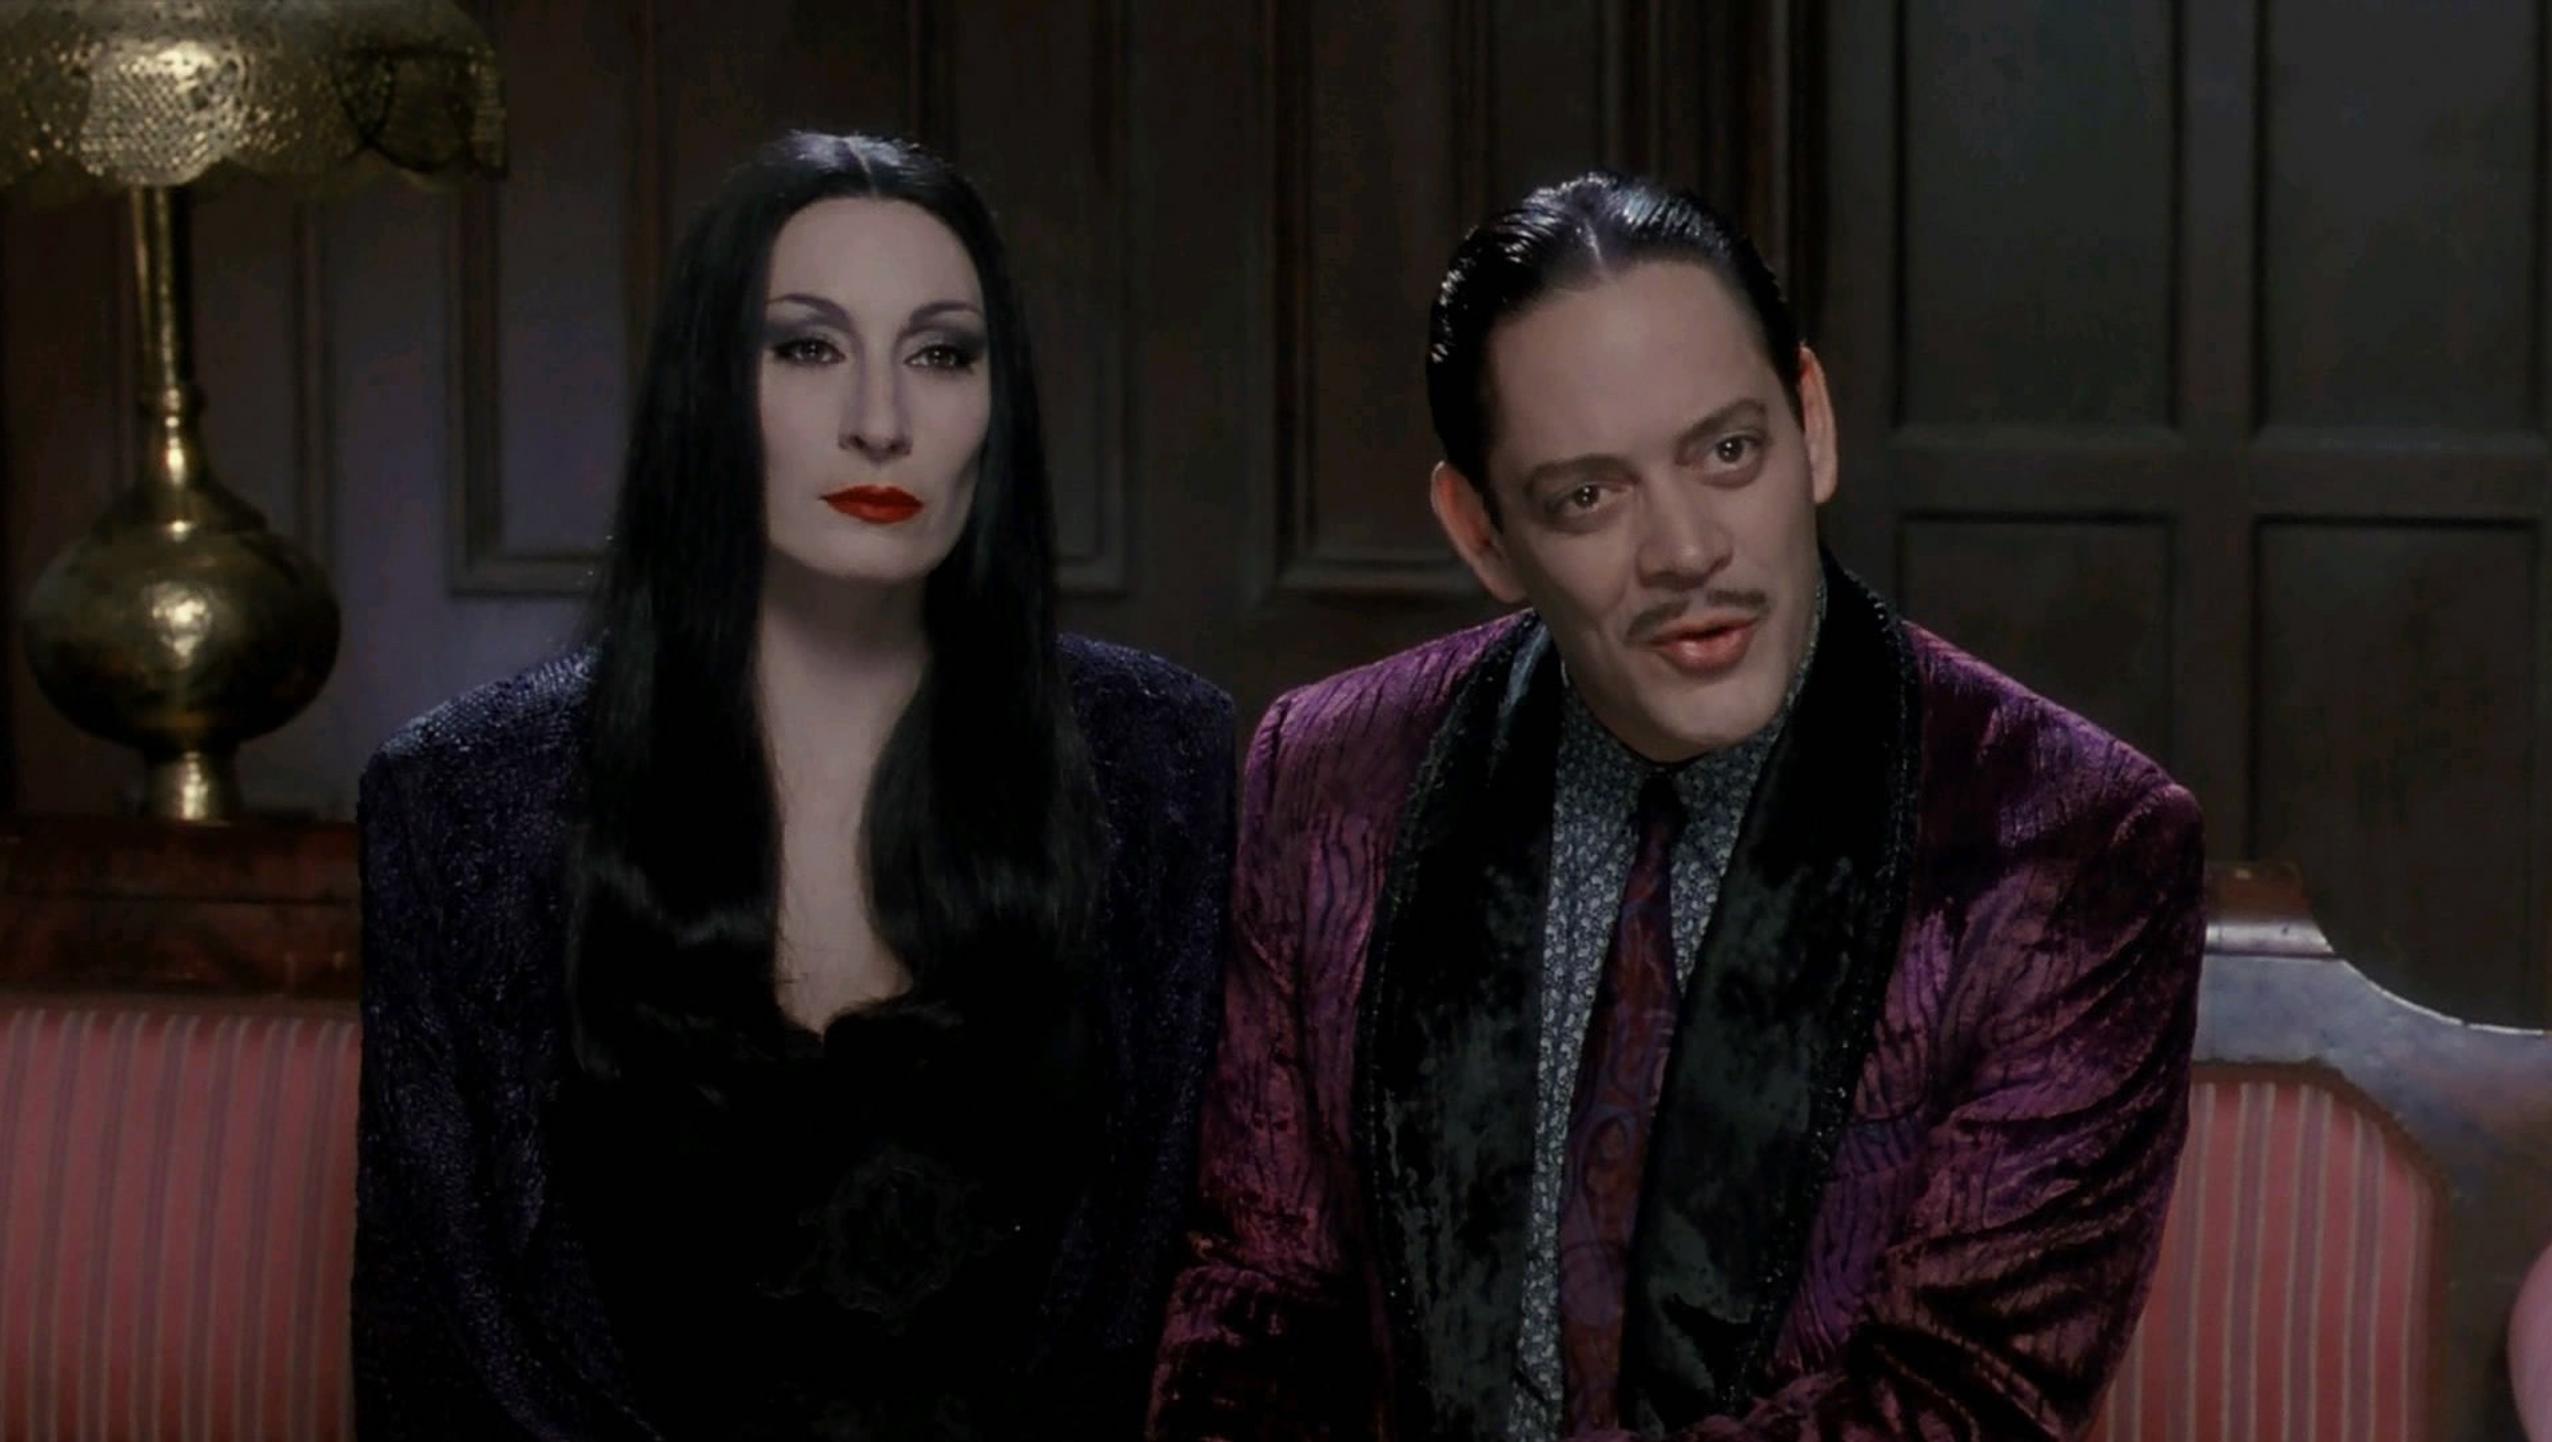 4K The Addams Family Movie Minimal Wallpapers